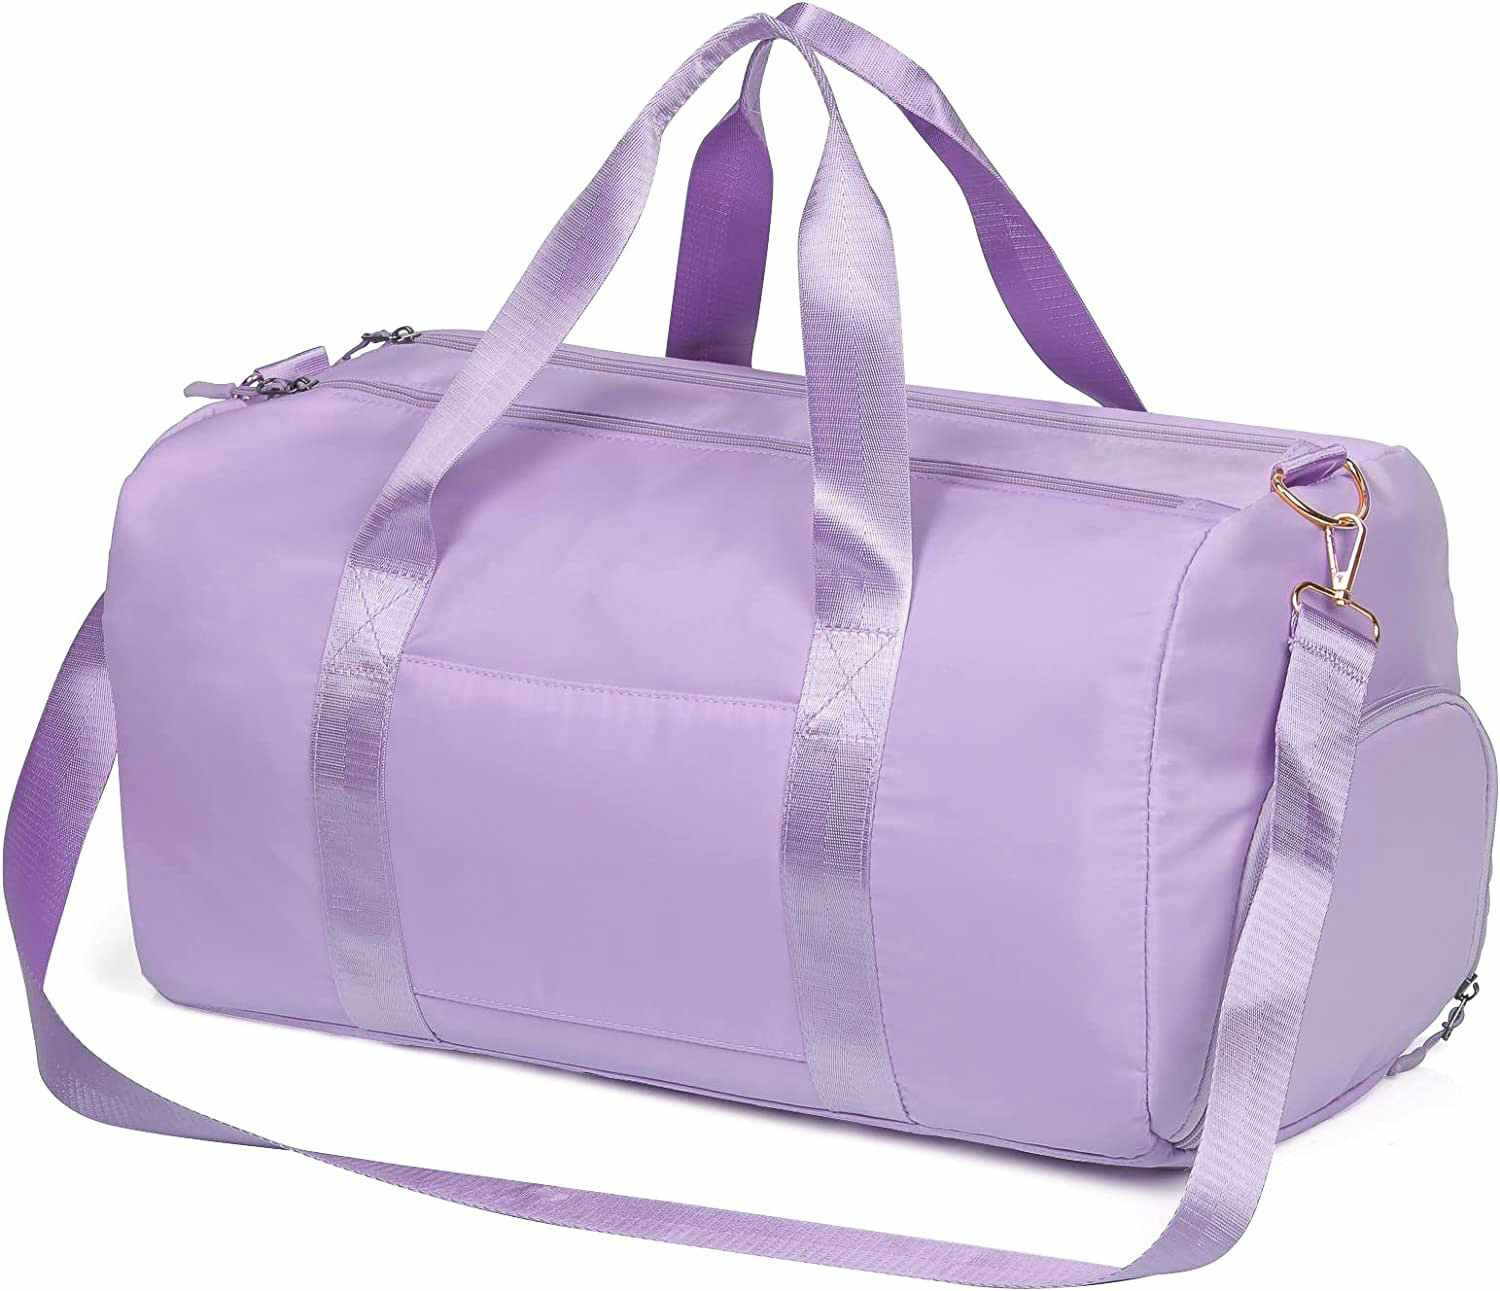 A lavender-colored dufflebag on a white background.